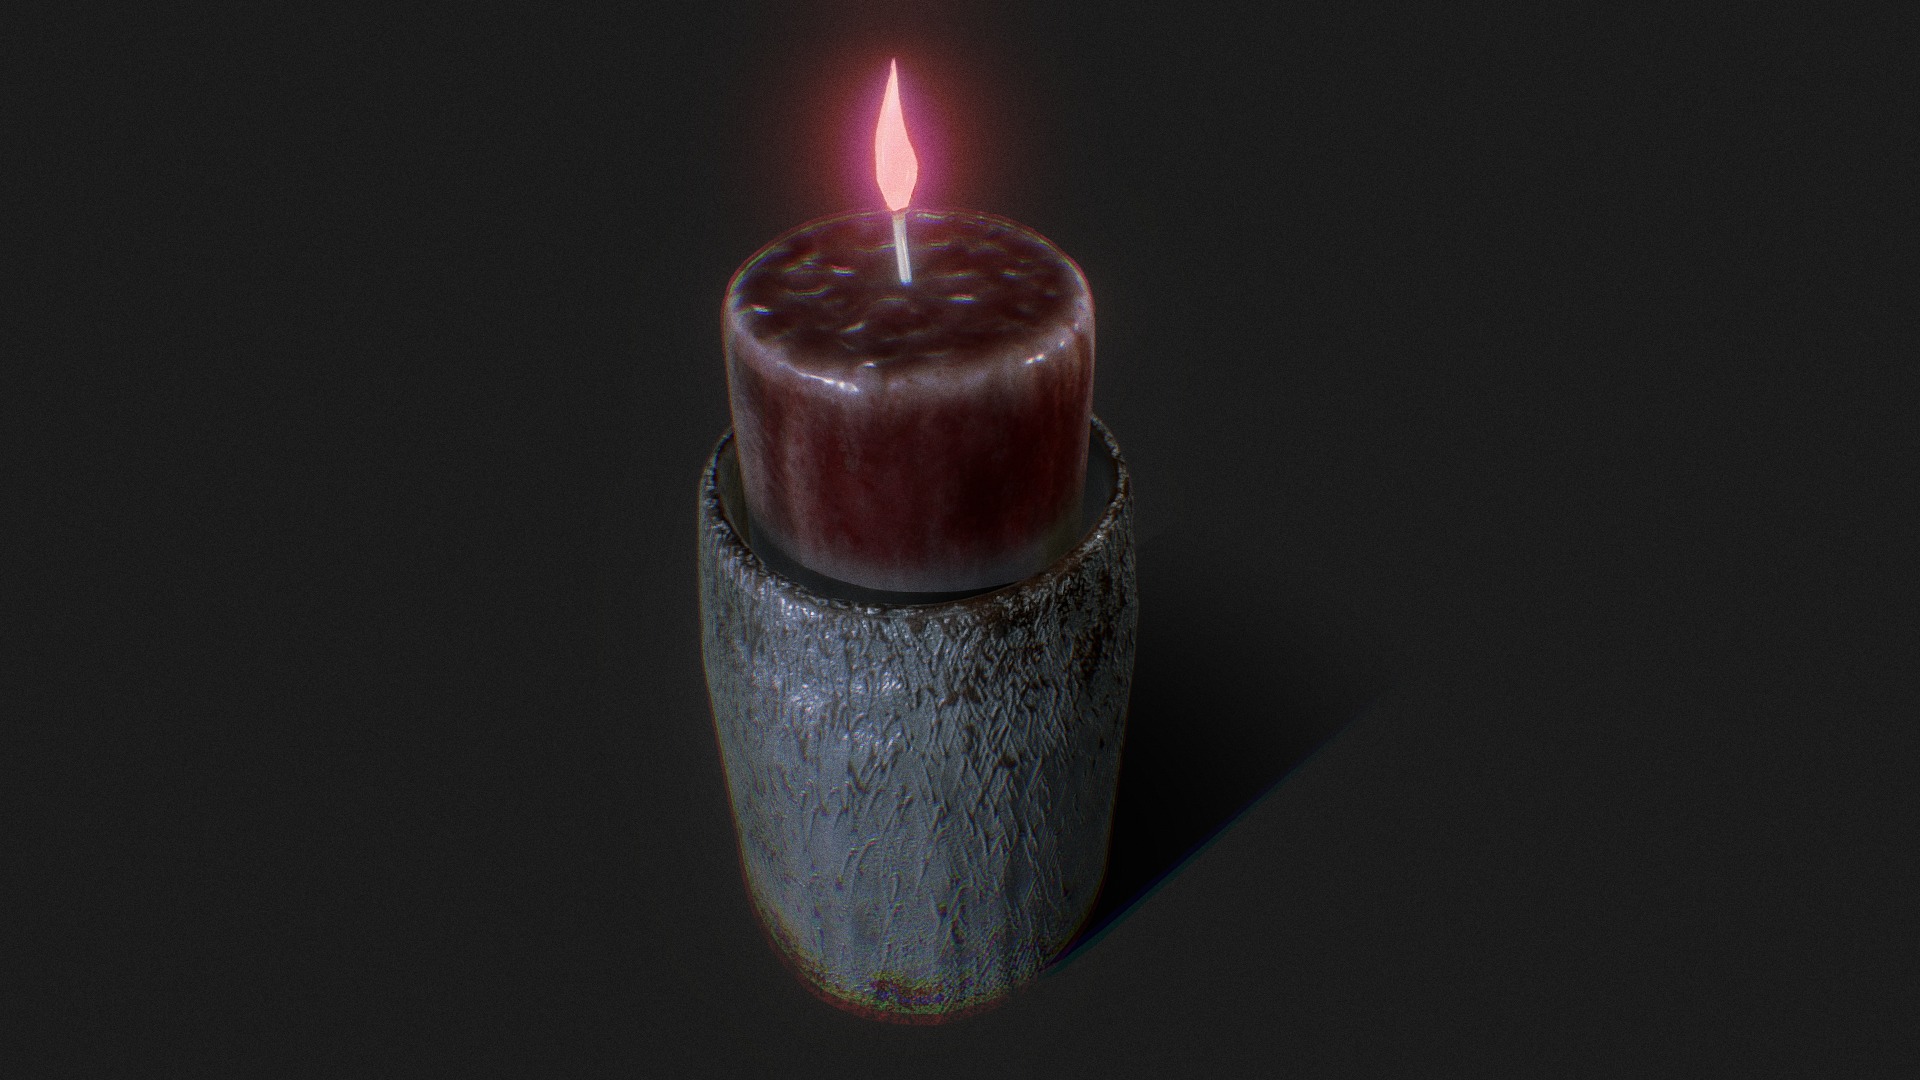 3D model Tryout Candle - This is a 3D model of the Tryout Candle. The 3D model is about a candle in a glass jar.